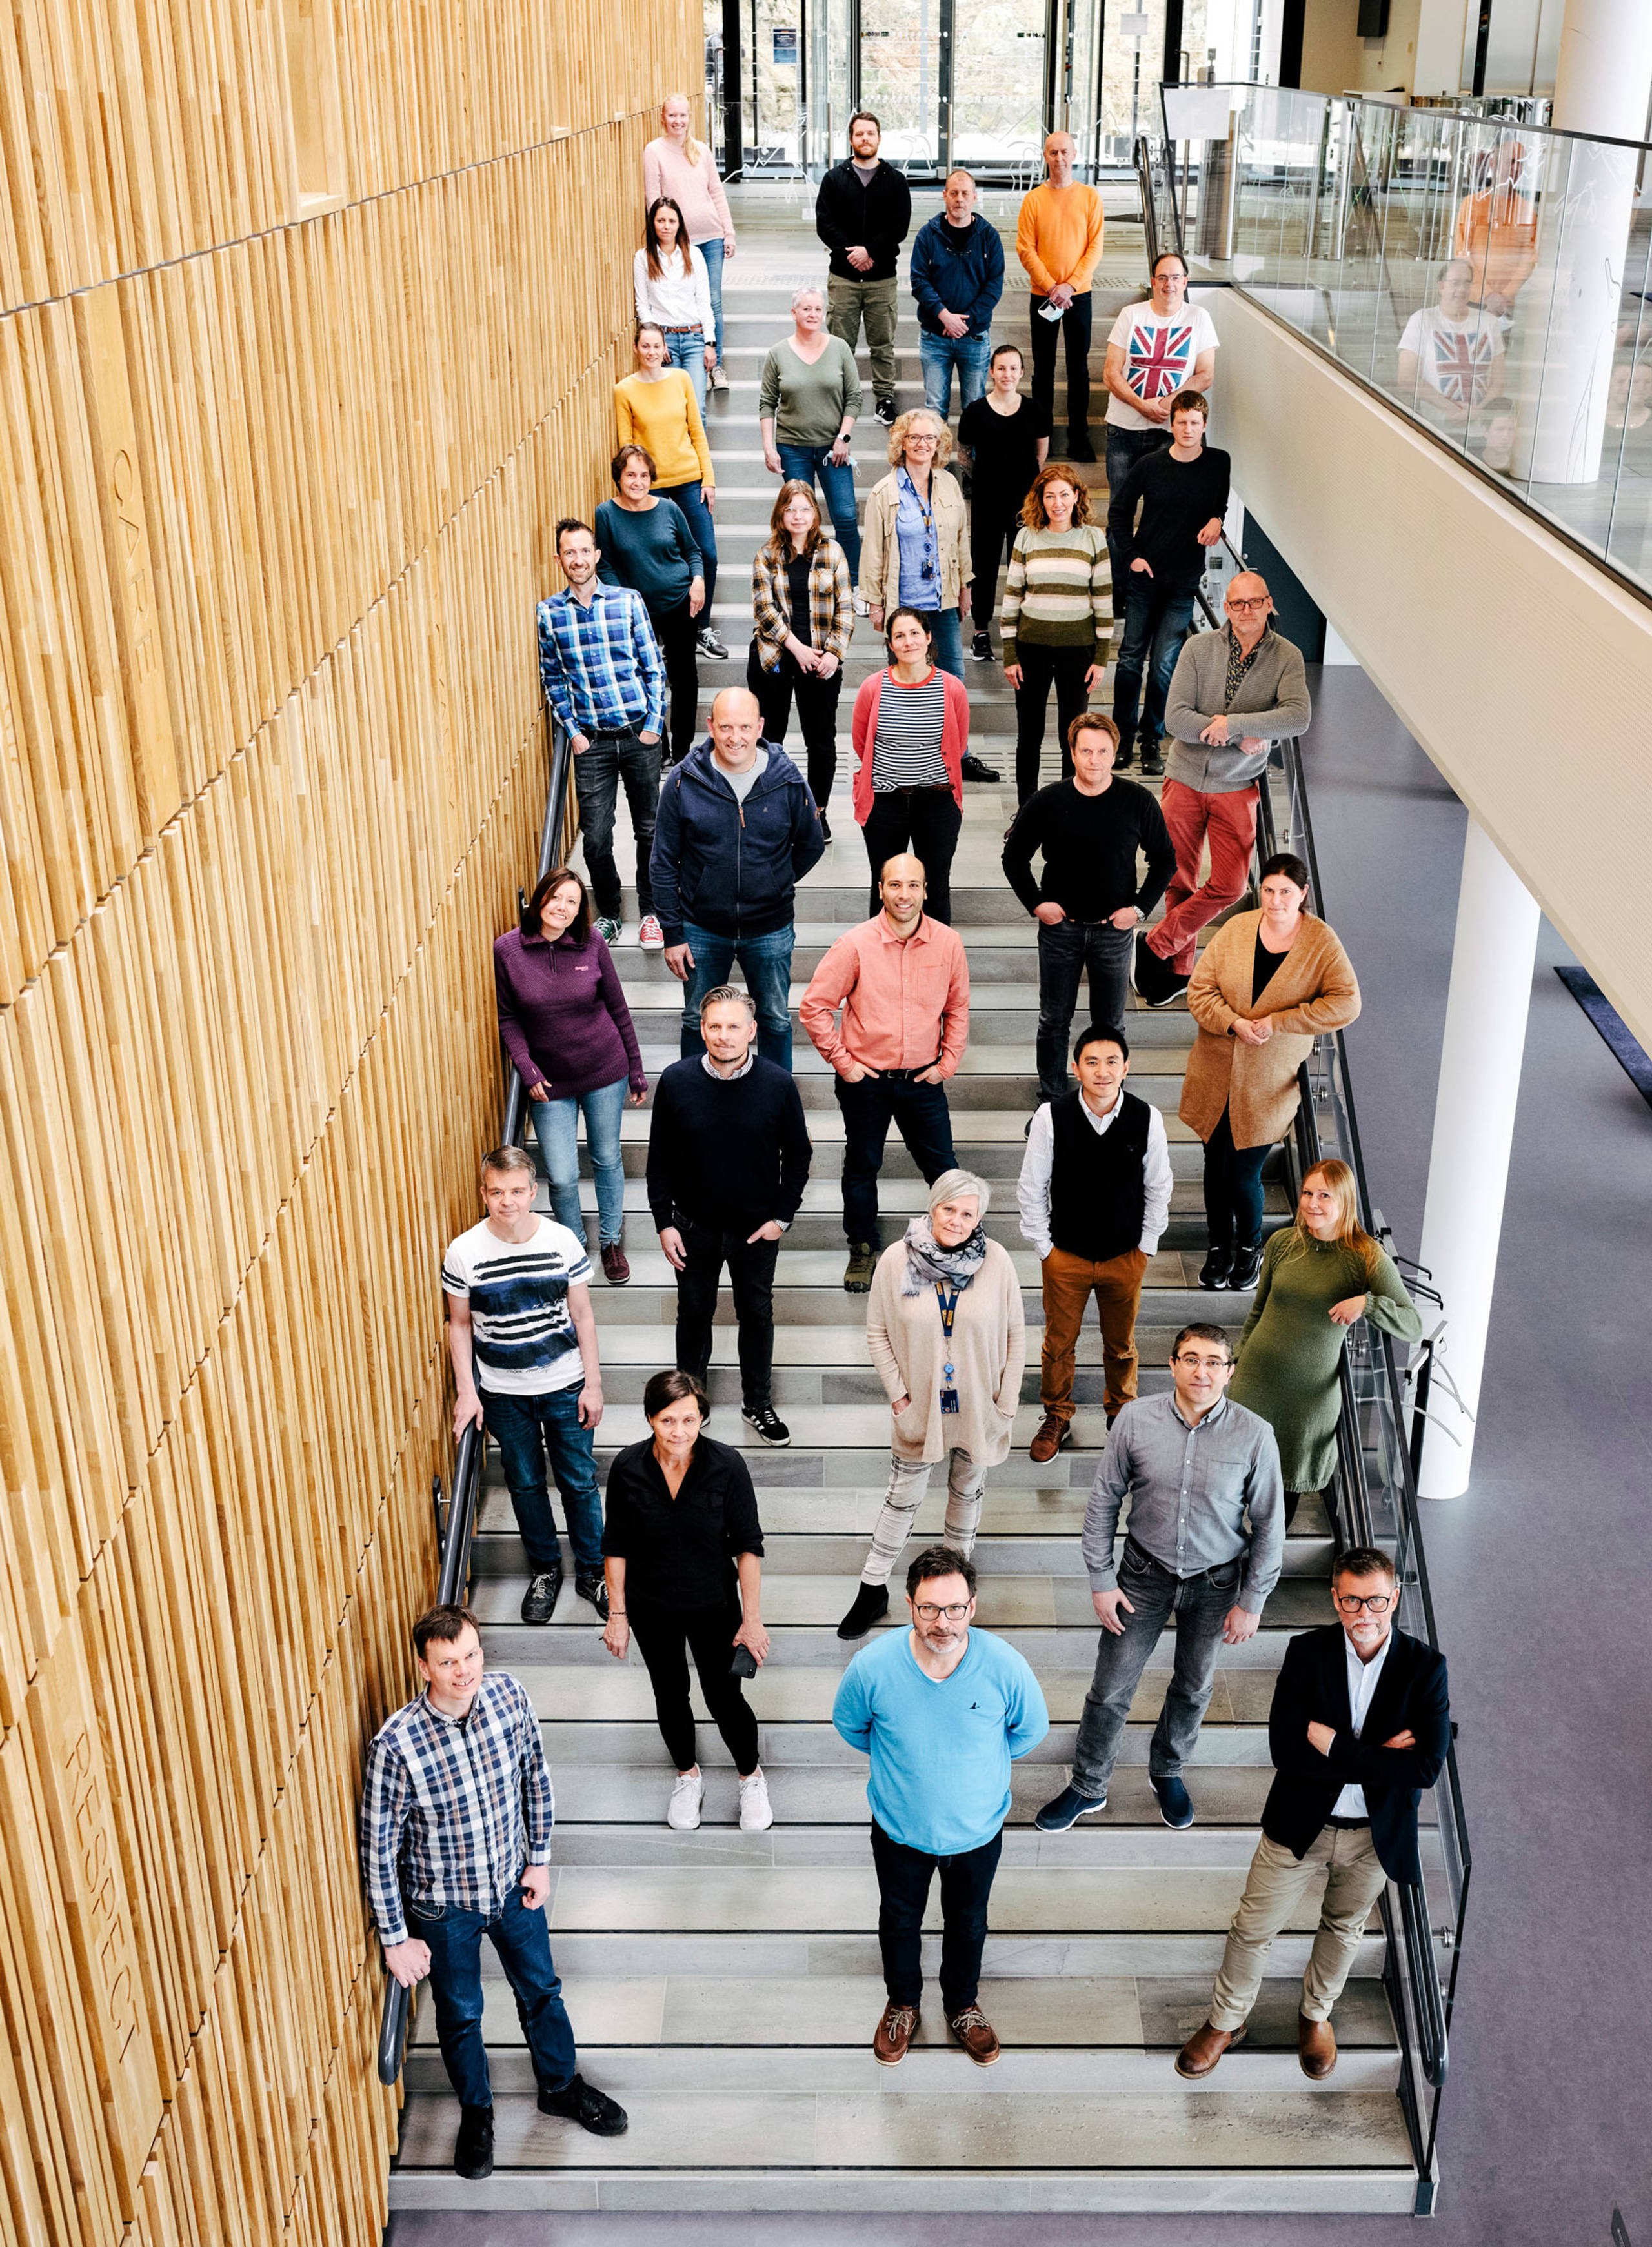 Employees photographed in the main stairway in Jotun's HQ in Nrway